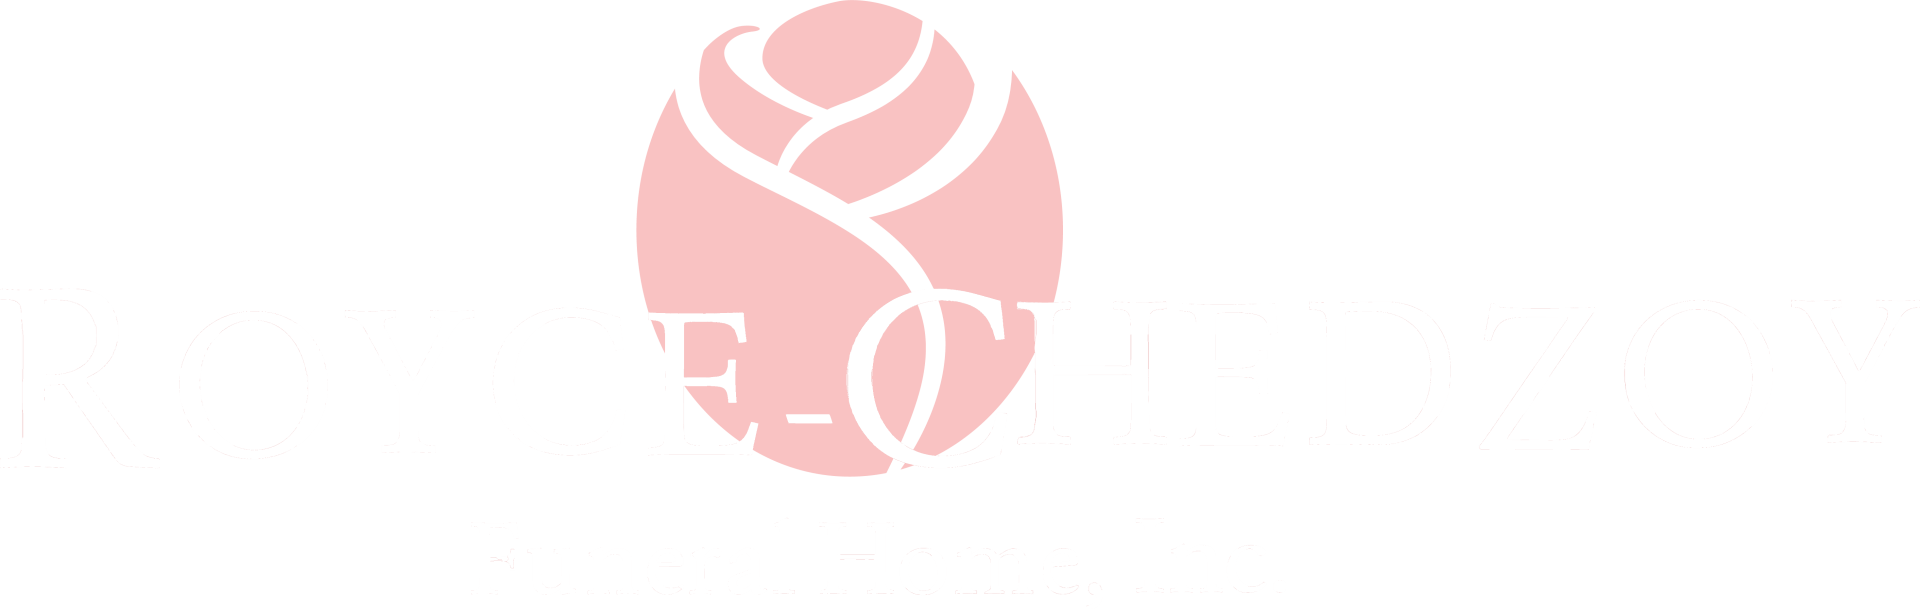 Royce Chedzoy Funeral Home Logo